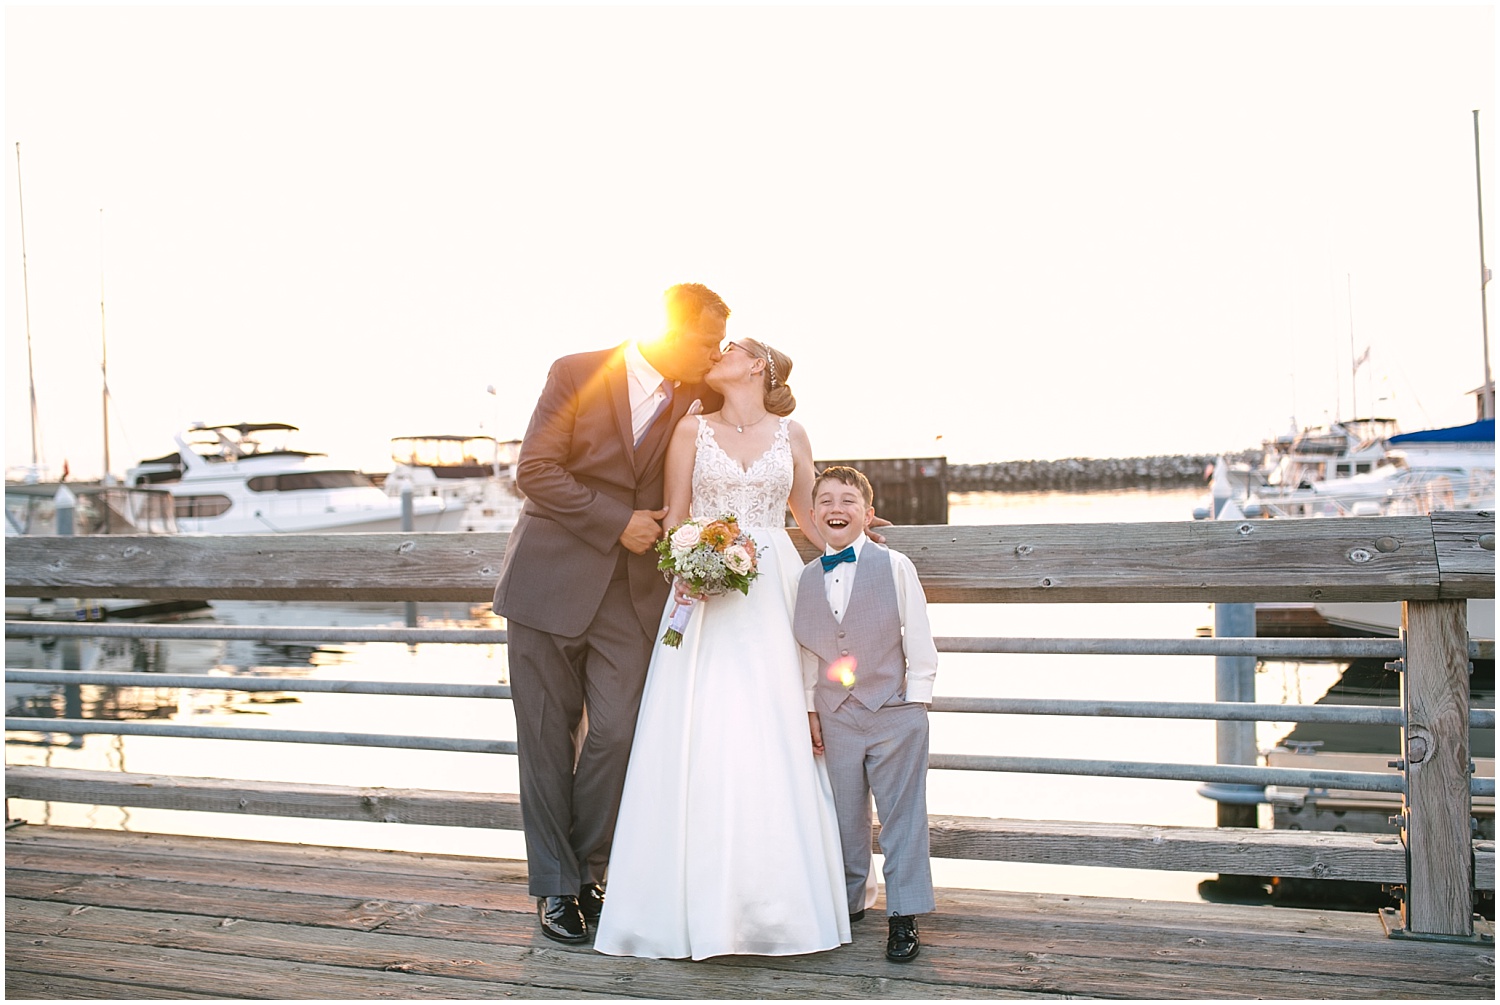 Bride and groom sunset portraits on the dock at Edmonds Yacht Club wedding